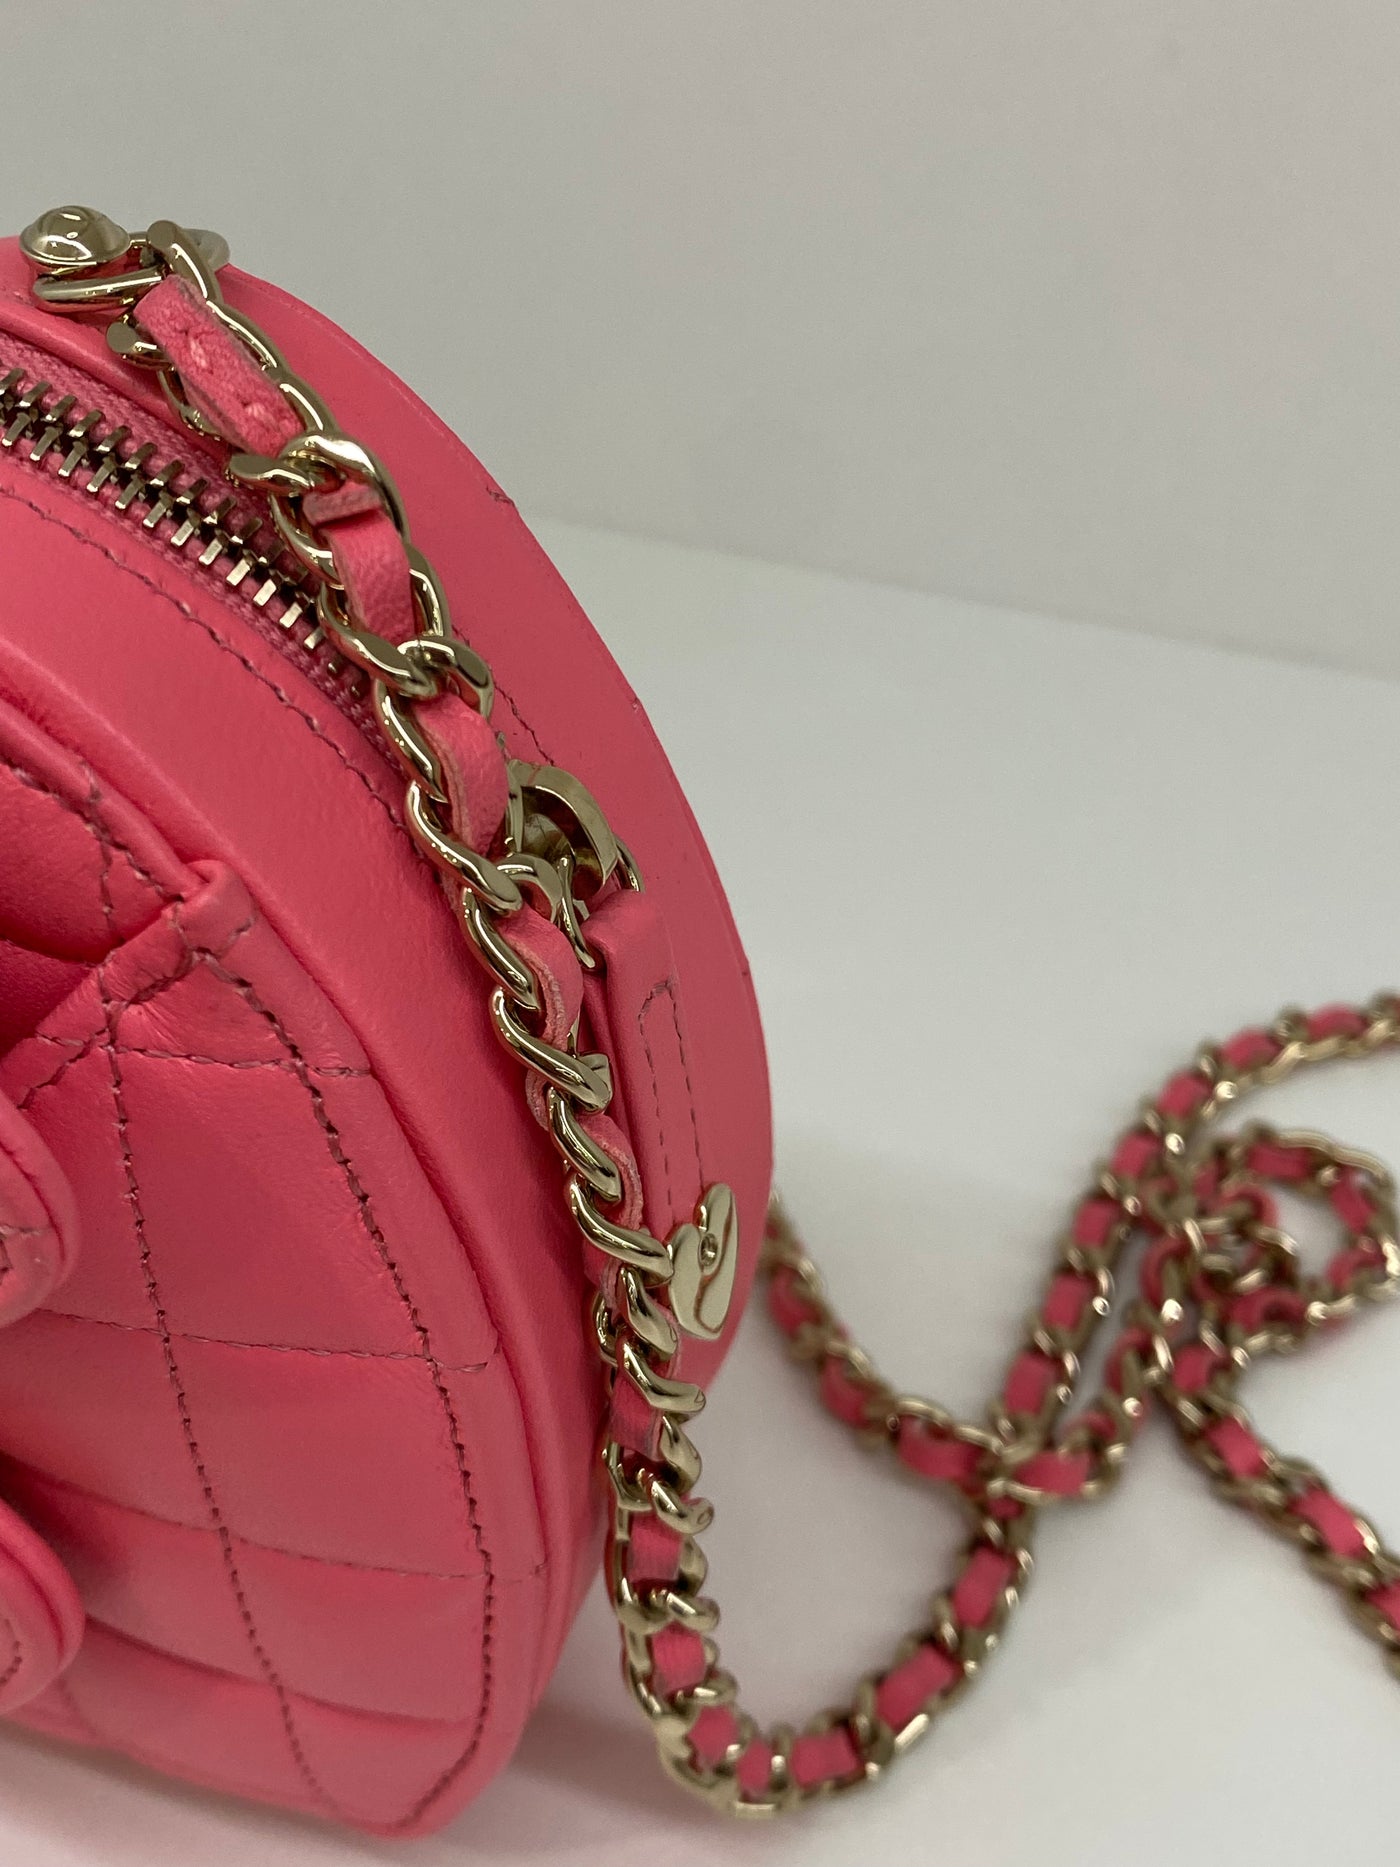 Chanel Heart Bag Small Pink